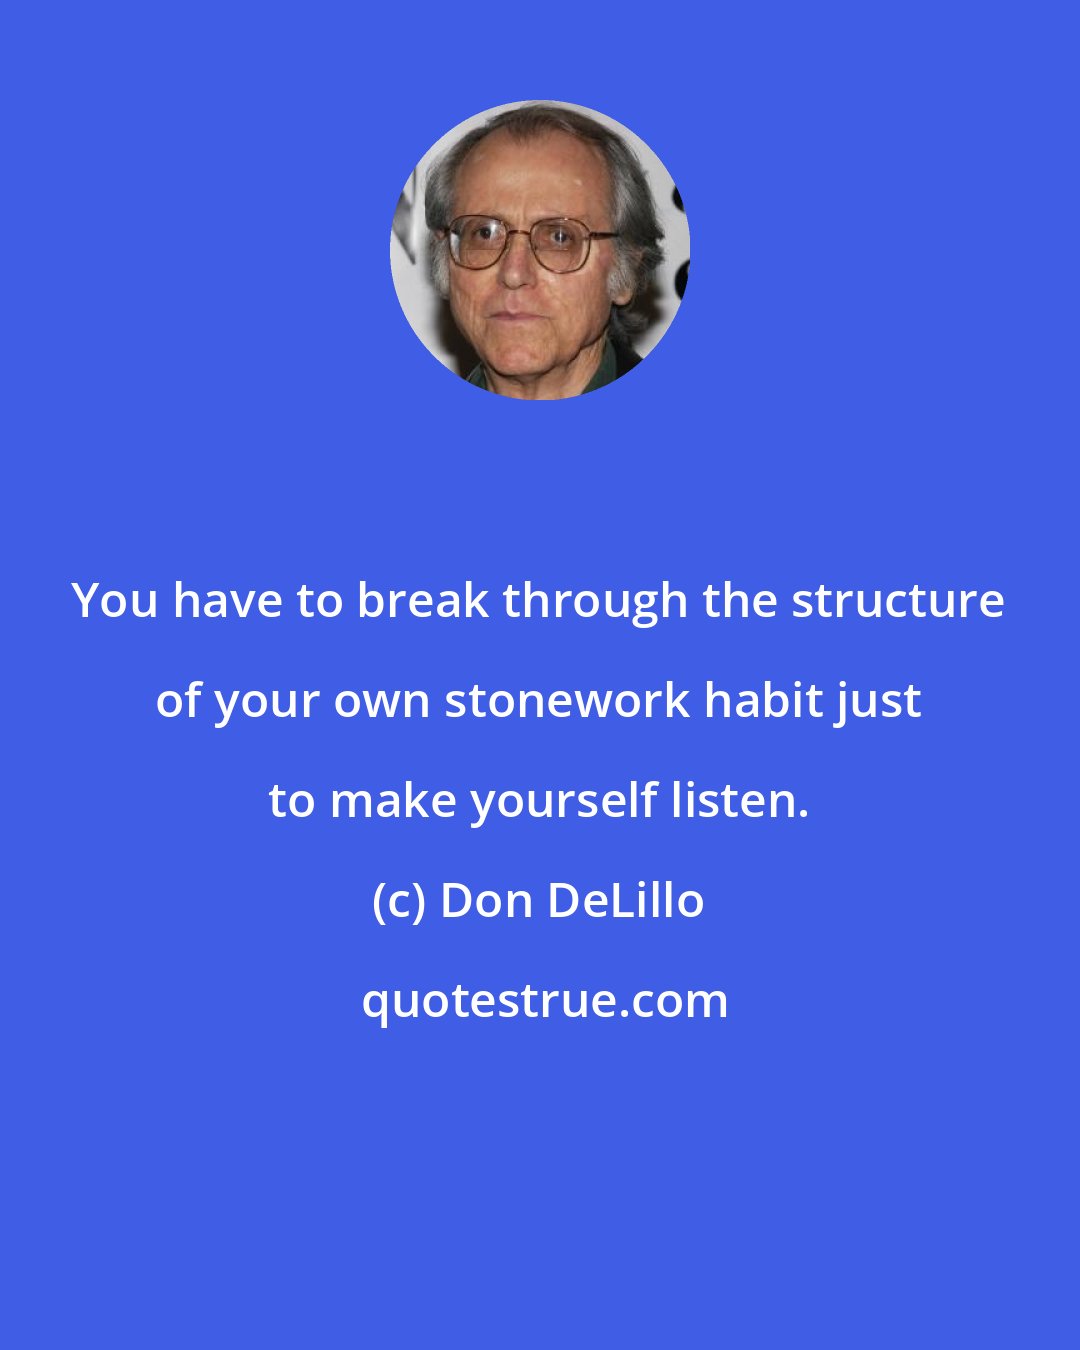 Don DeLillo: You have to break through the structure of your own stonework habit just to make yourself listen.